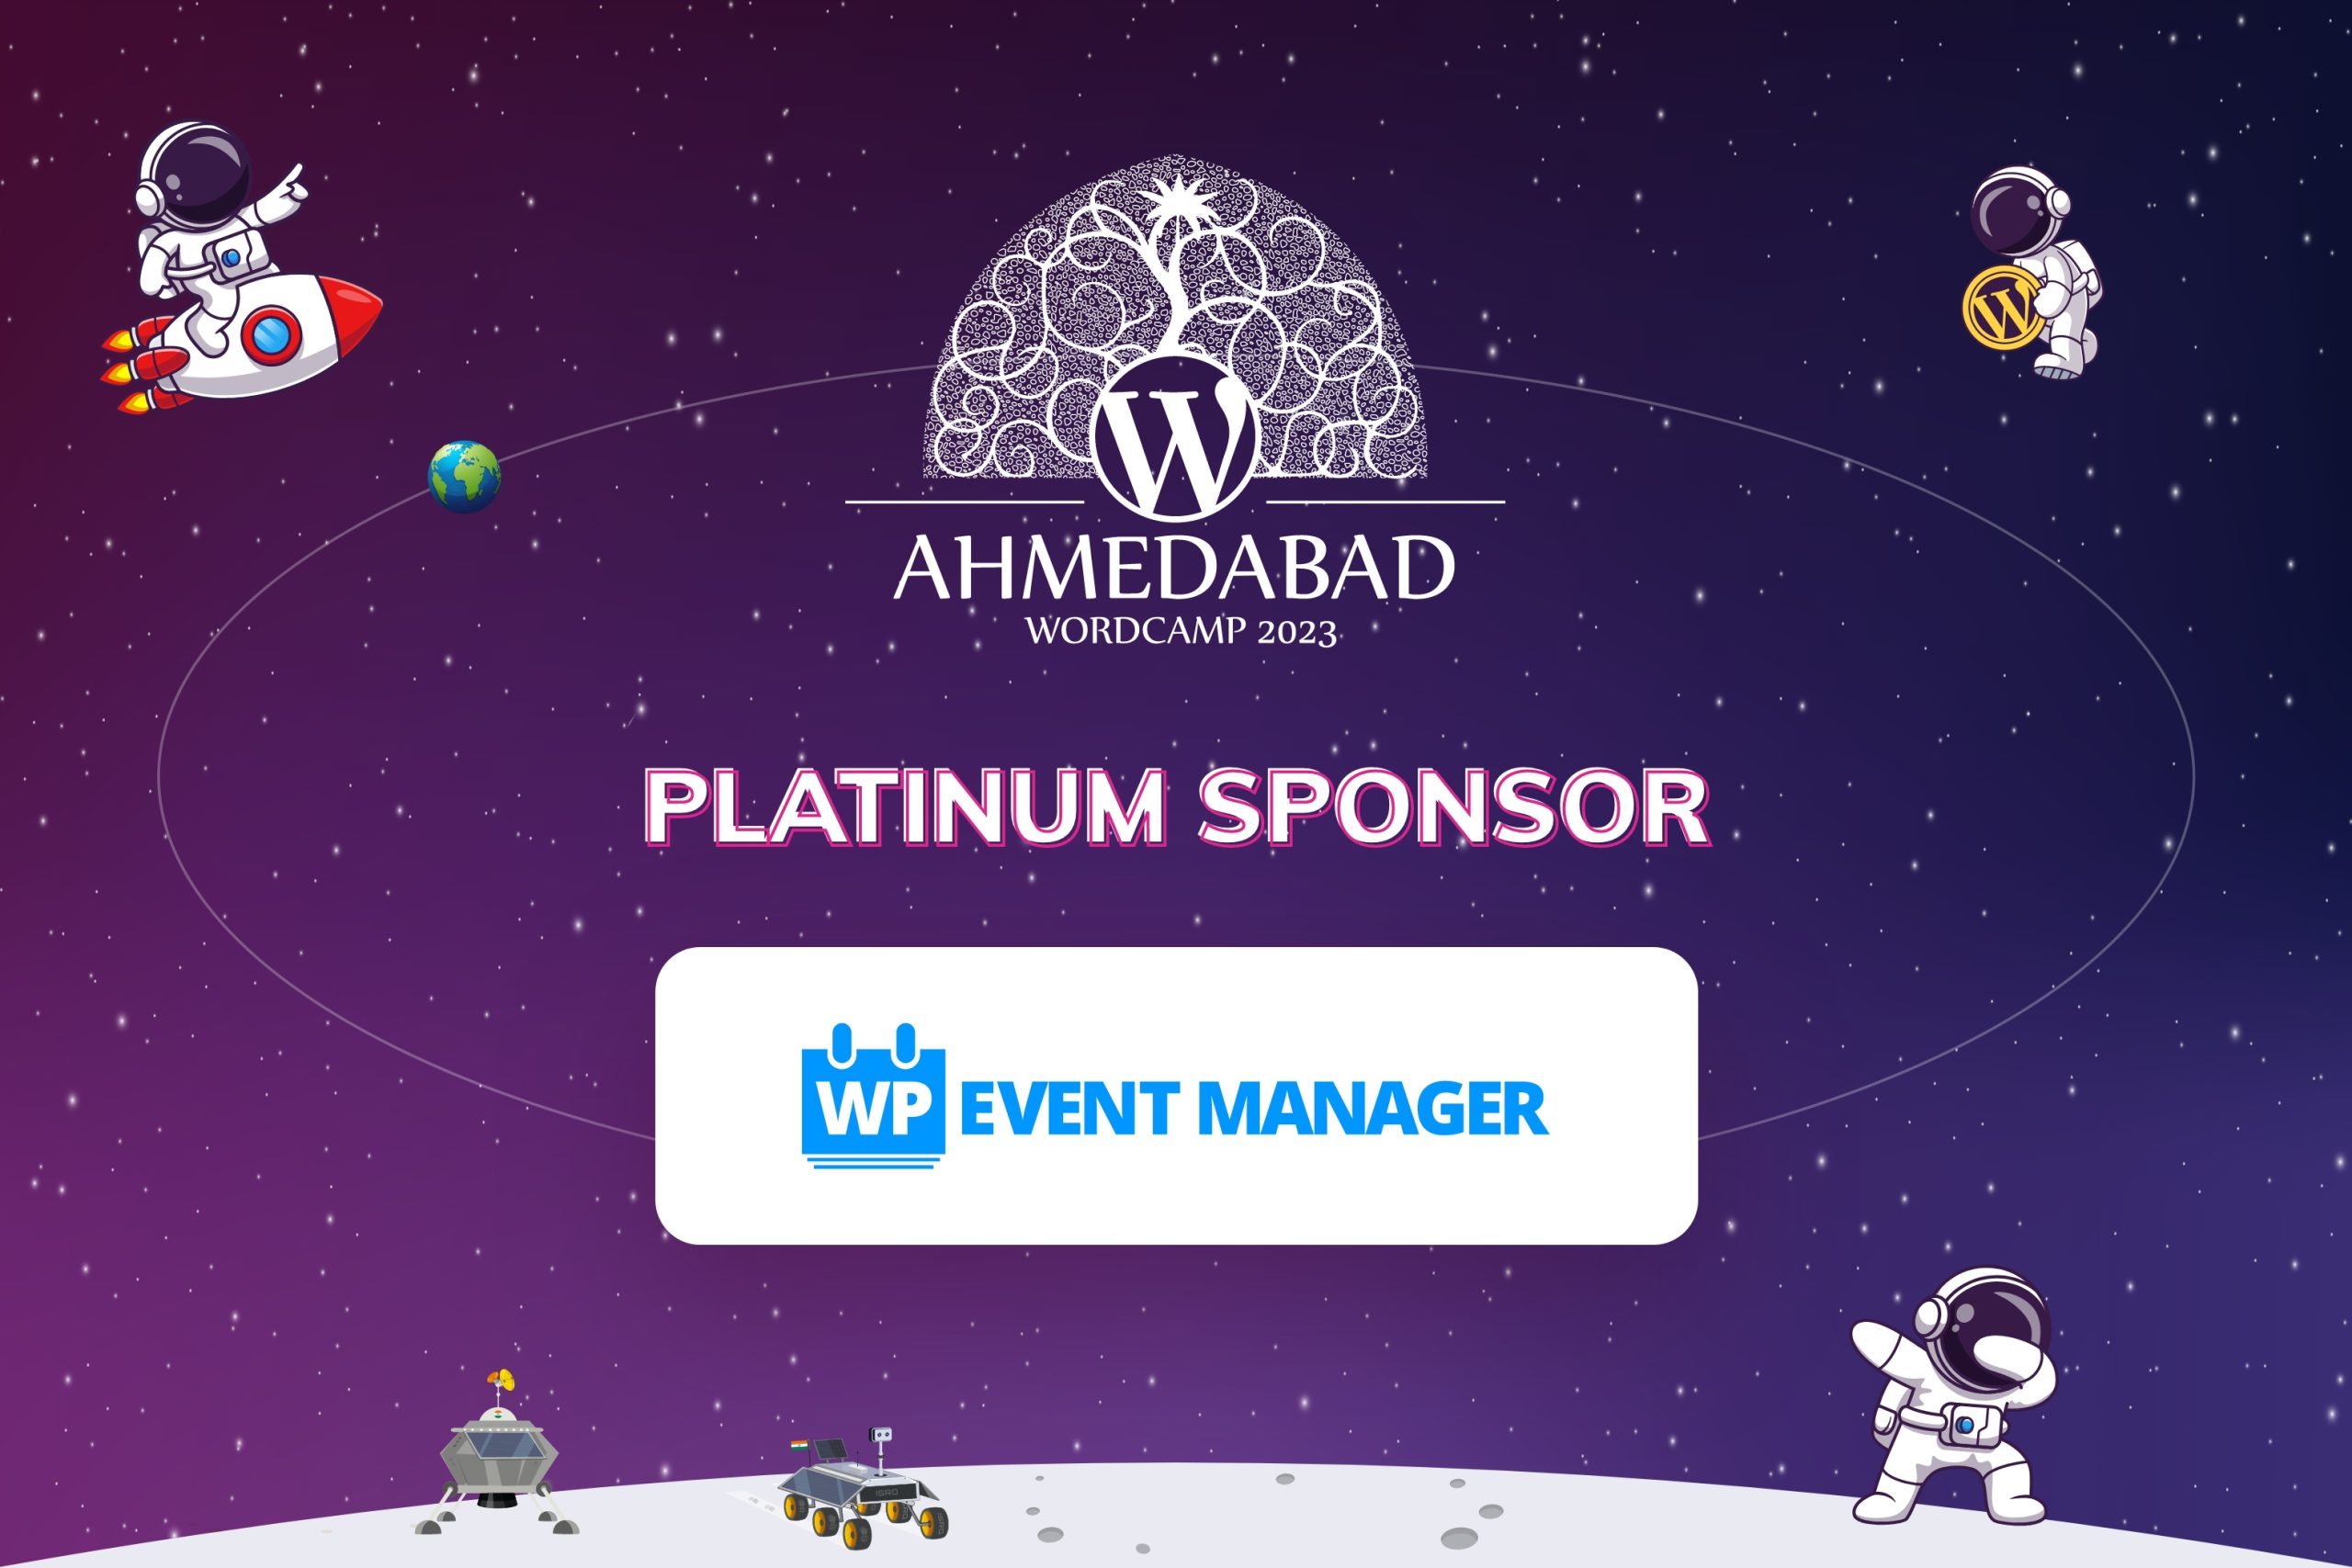 Thank You WP Event Manager, for being our Platinum Sponsor